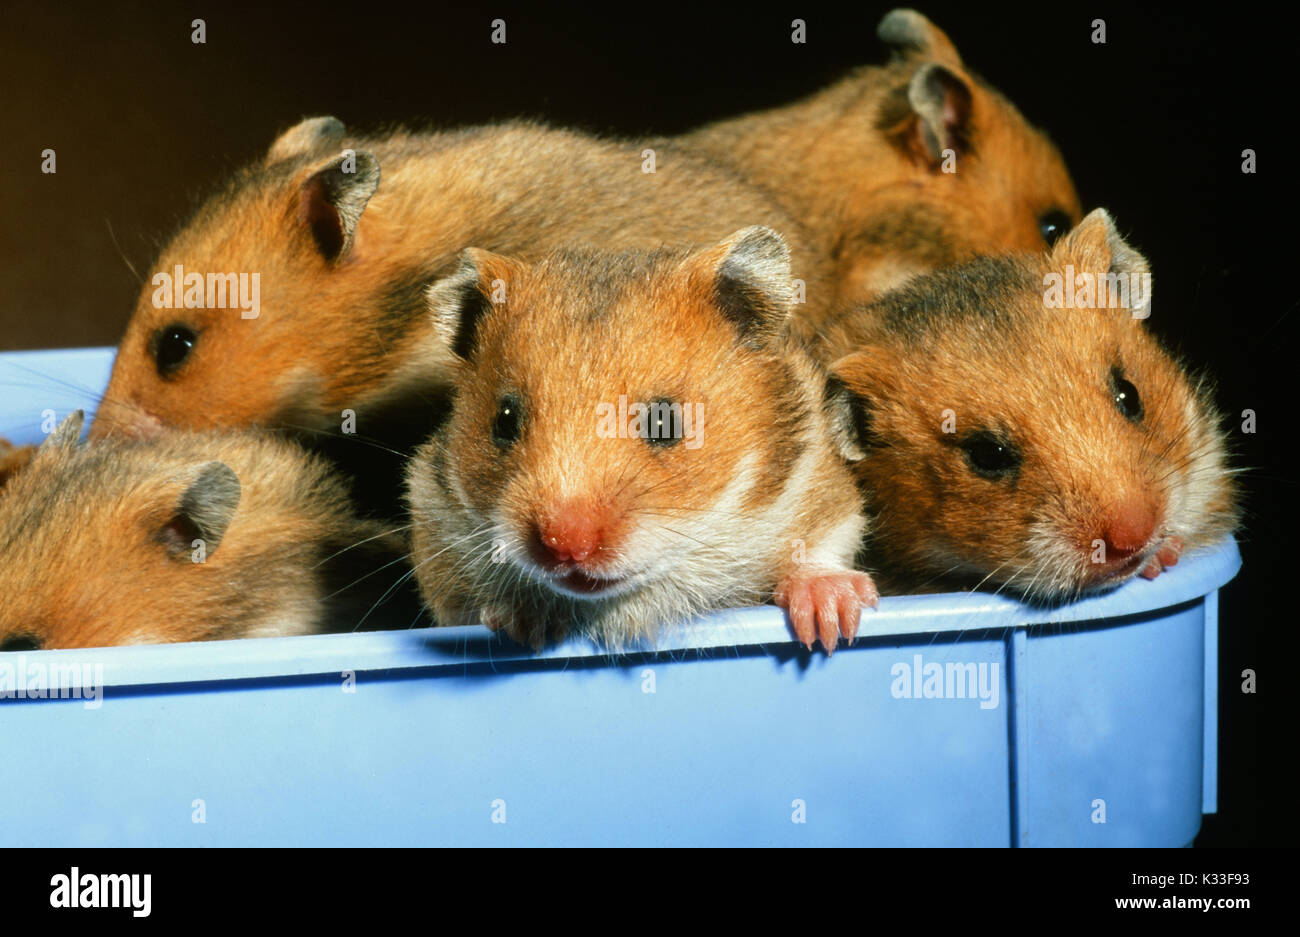 Syrian or Golden Hamsters Mesocricetus auratus. Nearly weaned young, aged 21 days. Stock Photo